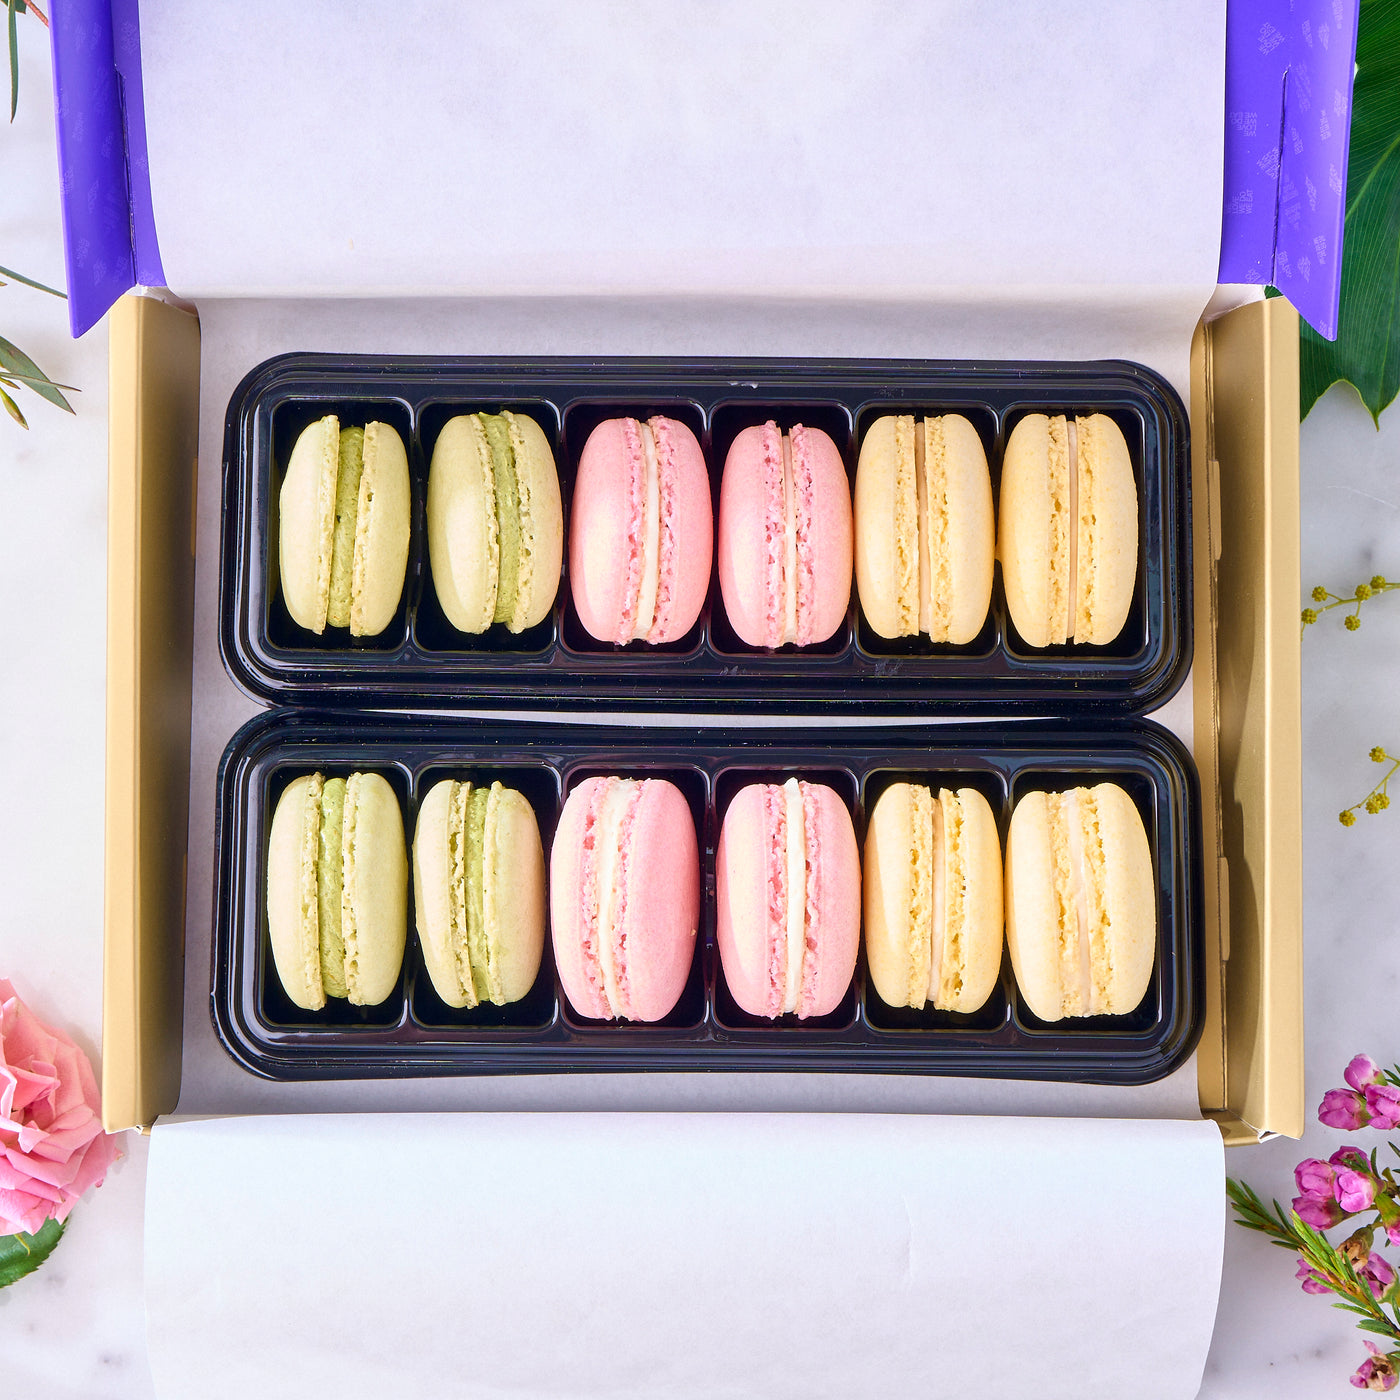 Mother’s Day Edition Macaron Gift Box